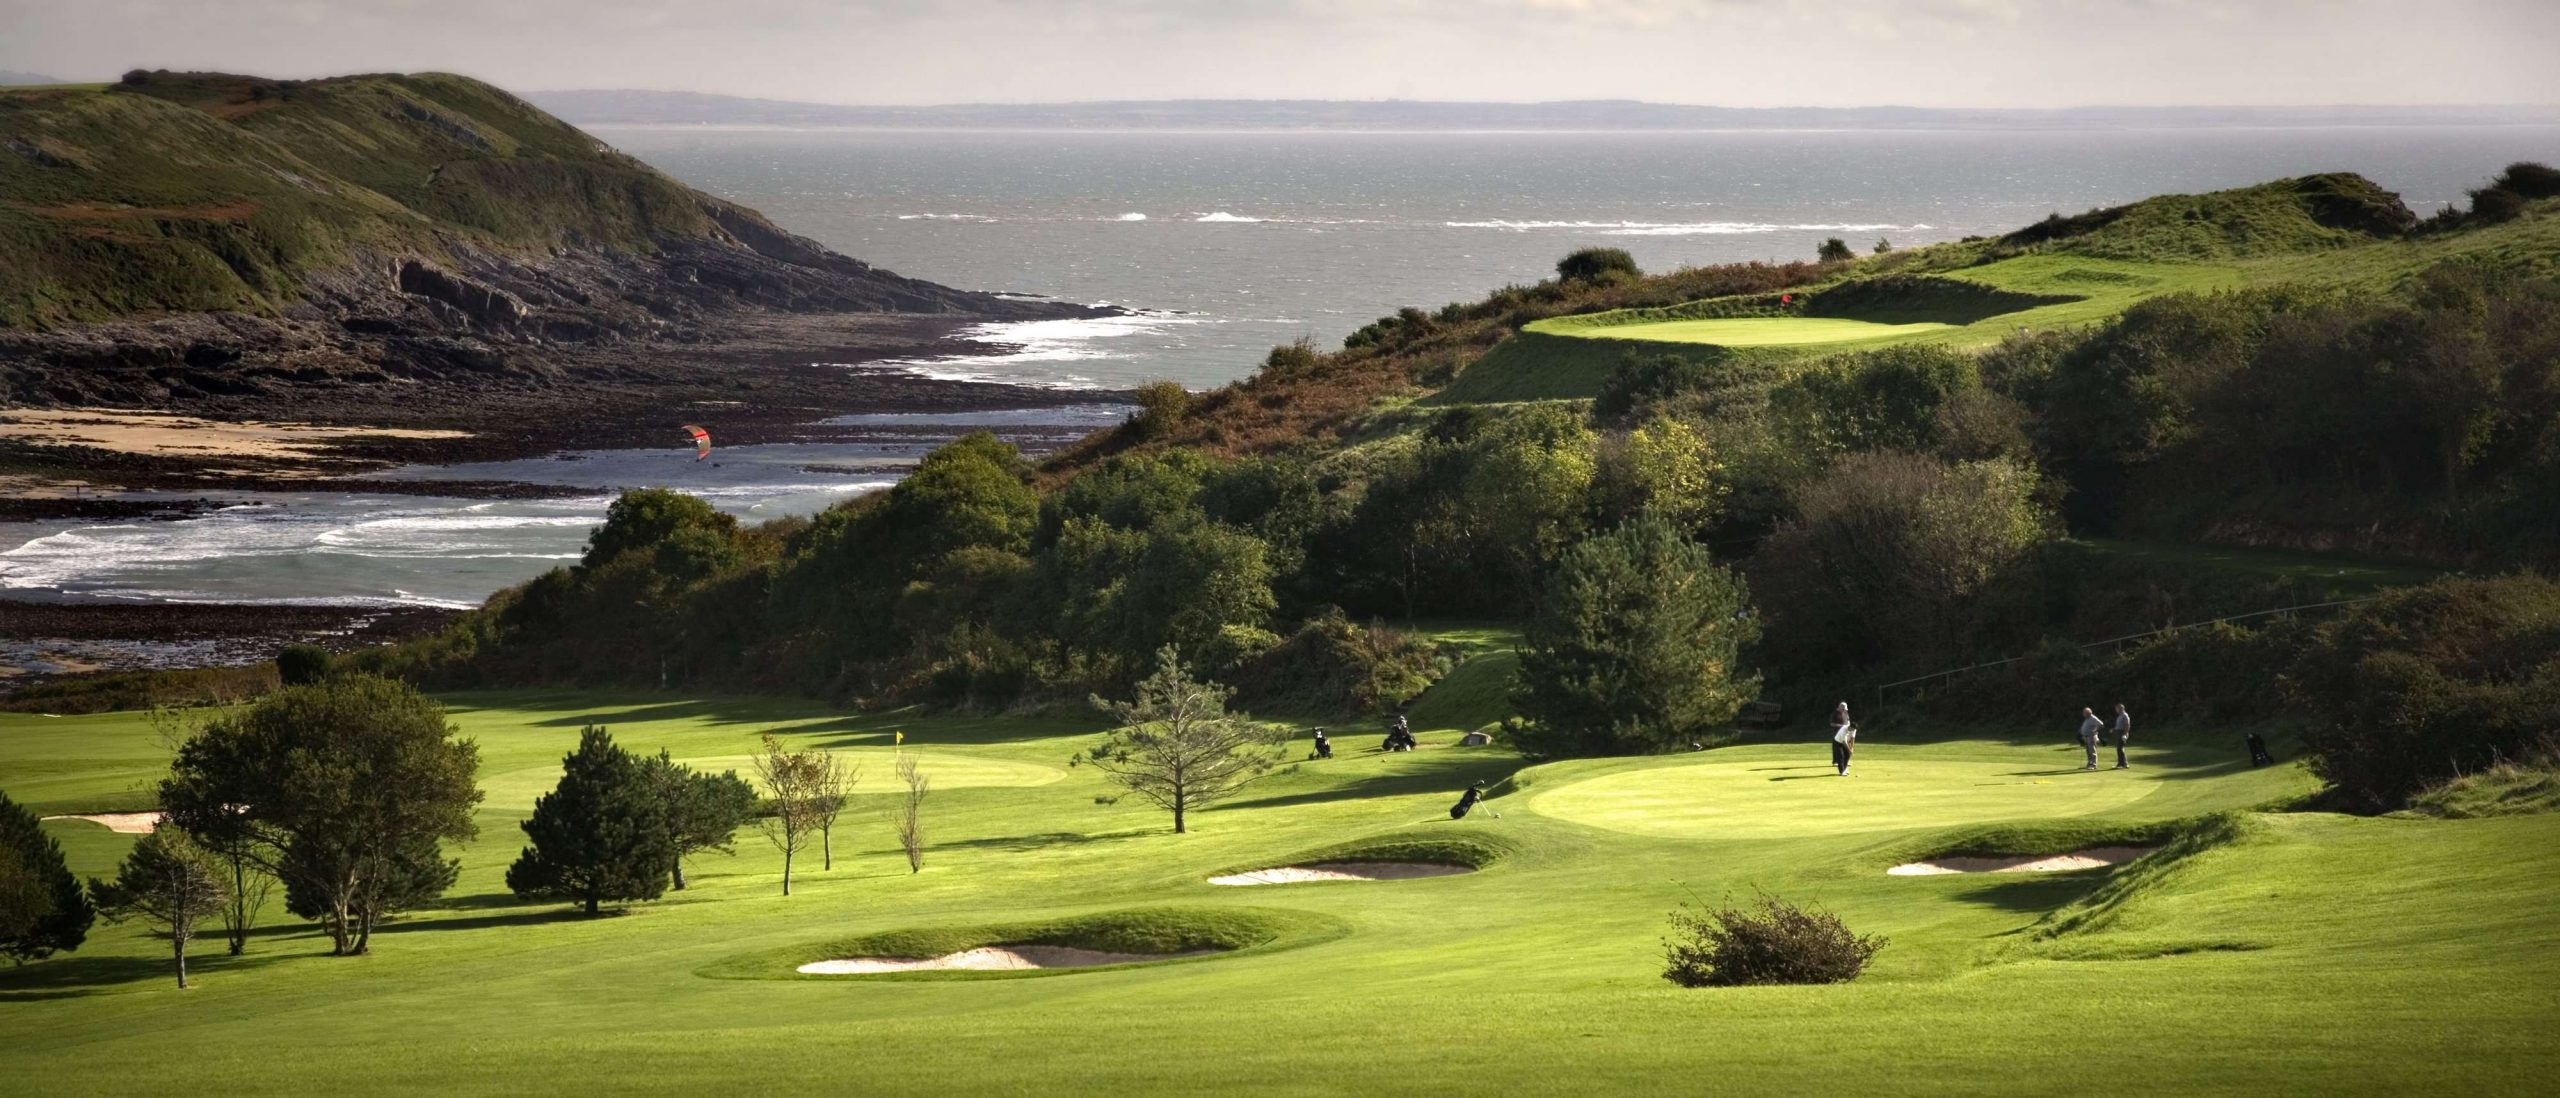 Langland Bay Golf Course in Wales | Golf Escapes